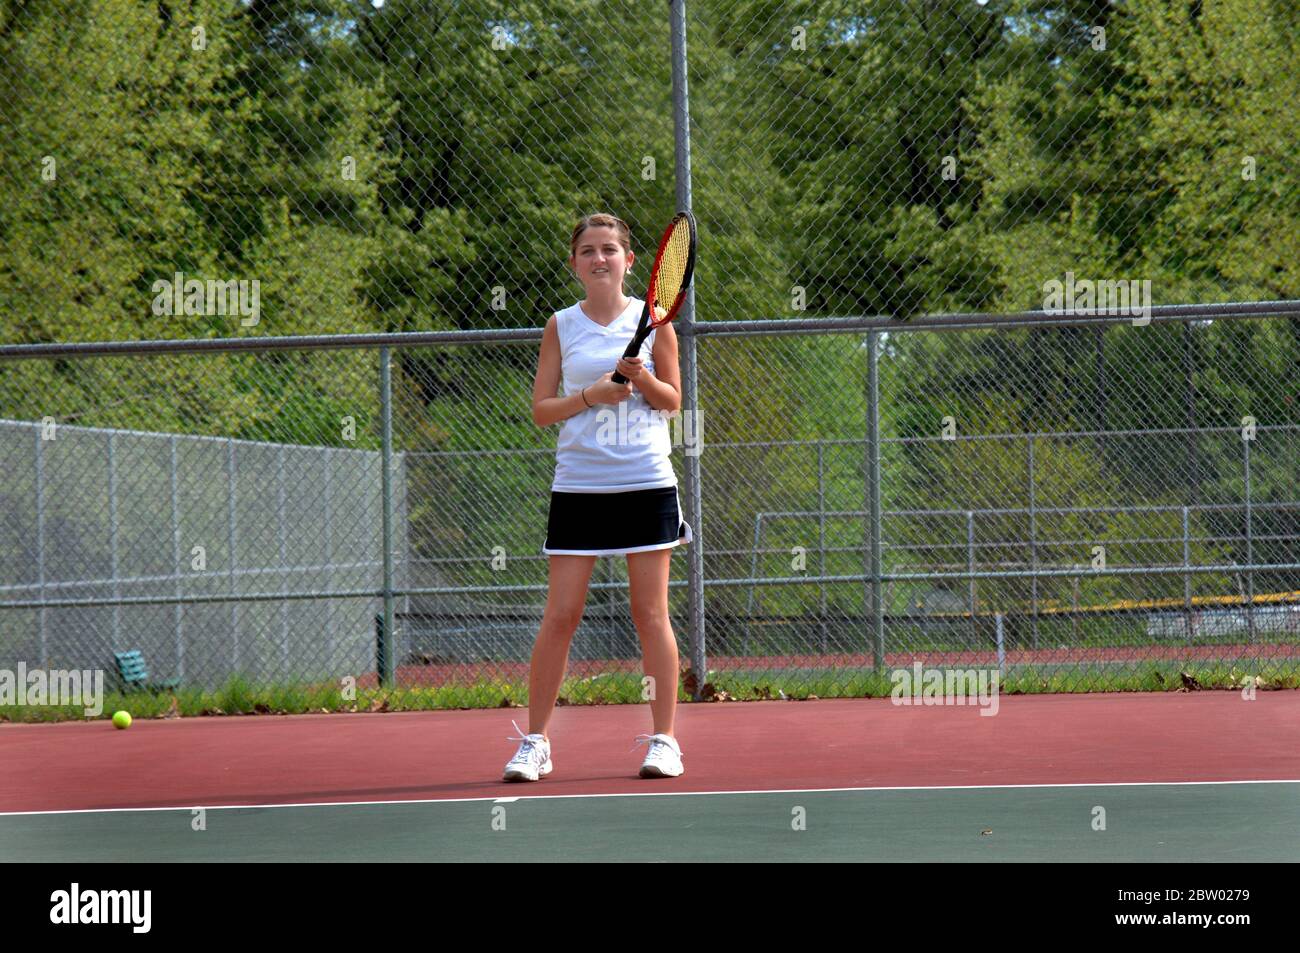 Varsity tennis player waits to receive the serve during a tennis match.  She is wearing a tennis skirt and tee shirt.  The court is outdoors. Stock Photo